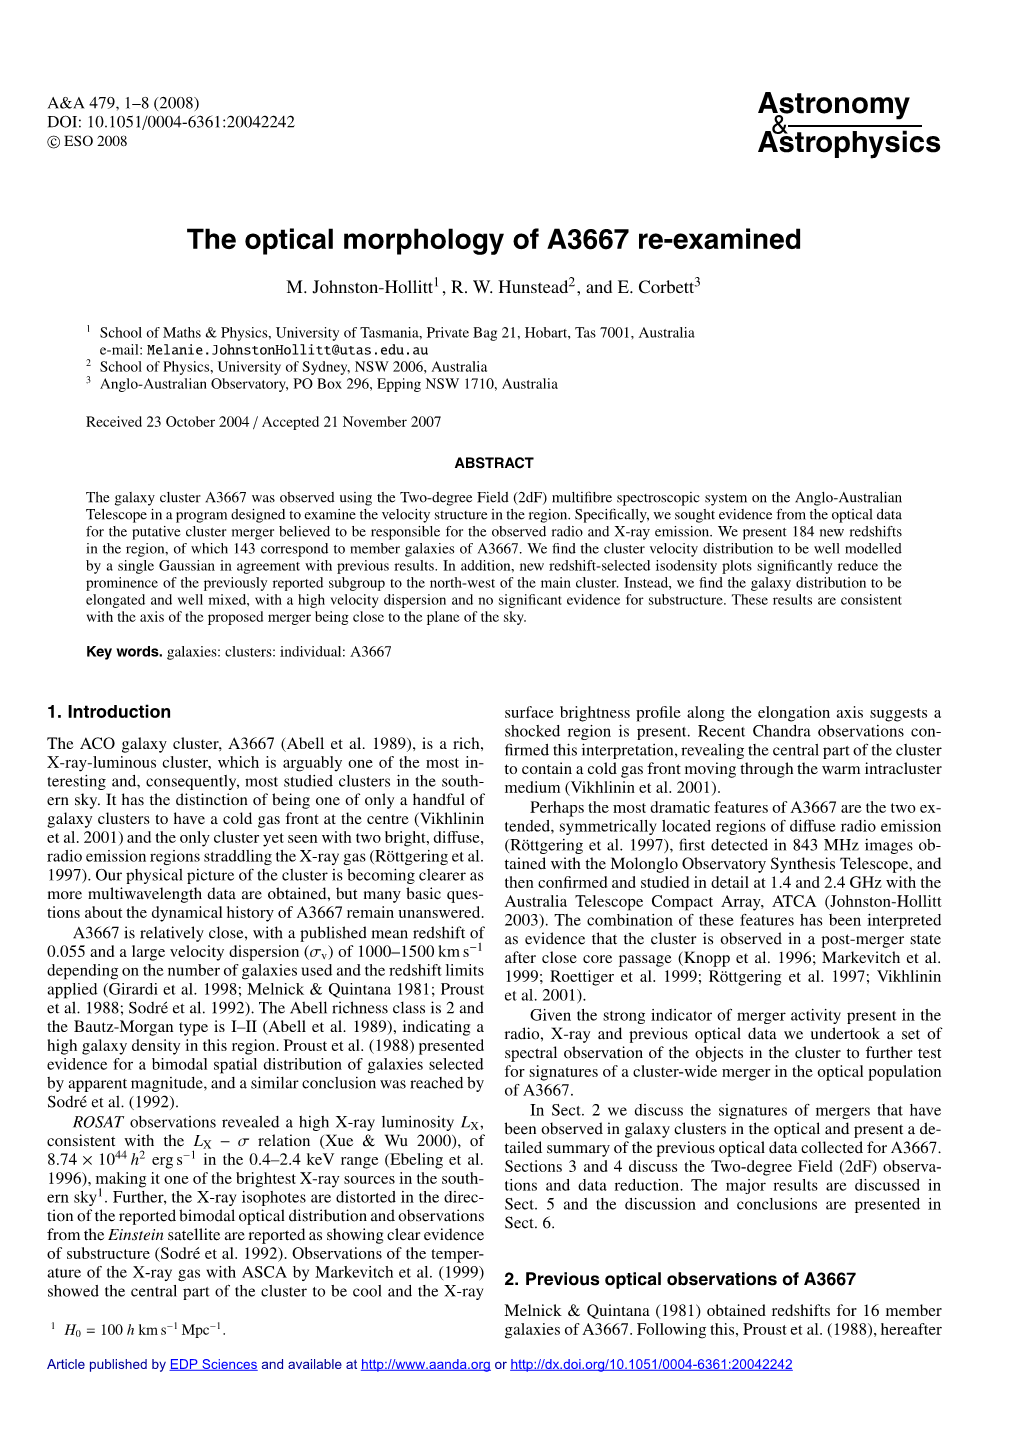 The Optical Morphology of A3667 Re-Examined